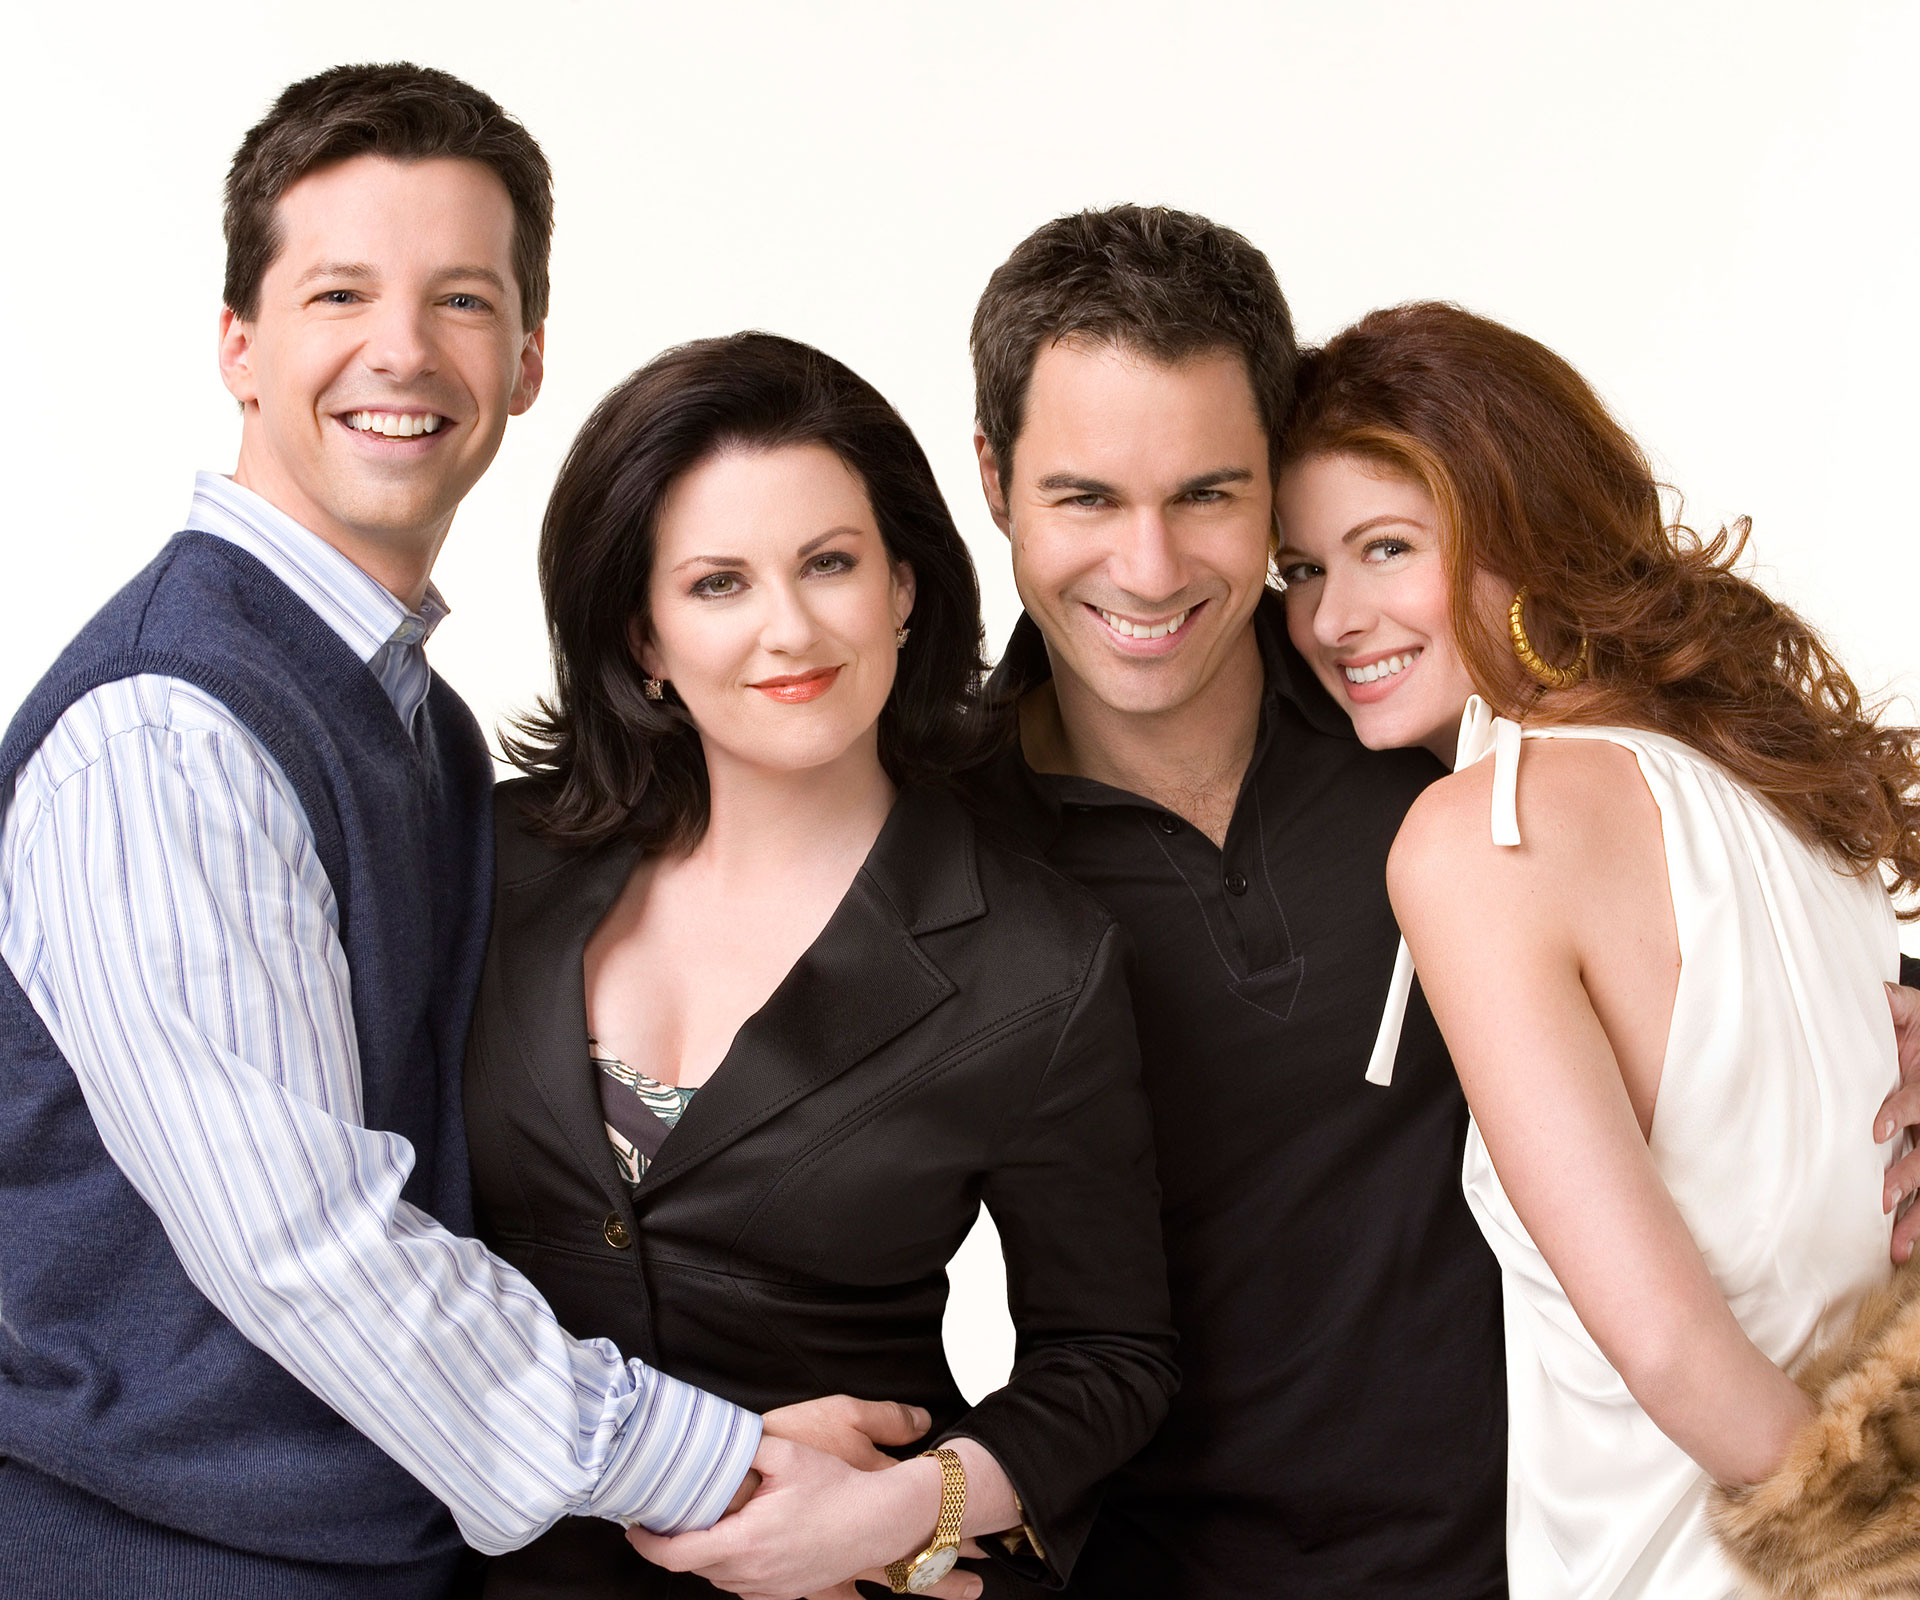 The official trailer for the Will & Grace revival is here!